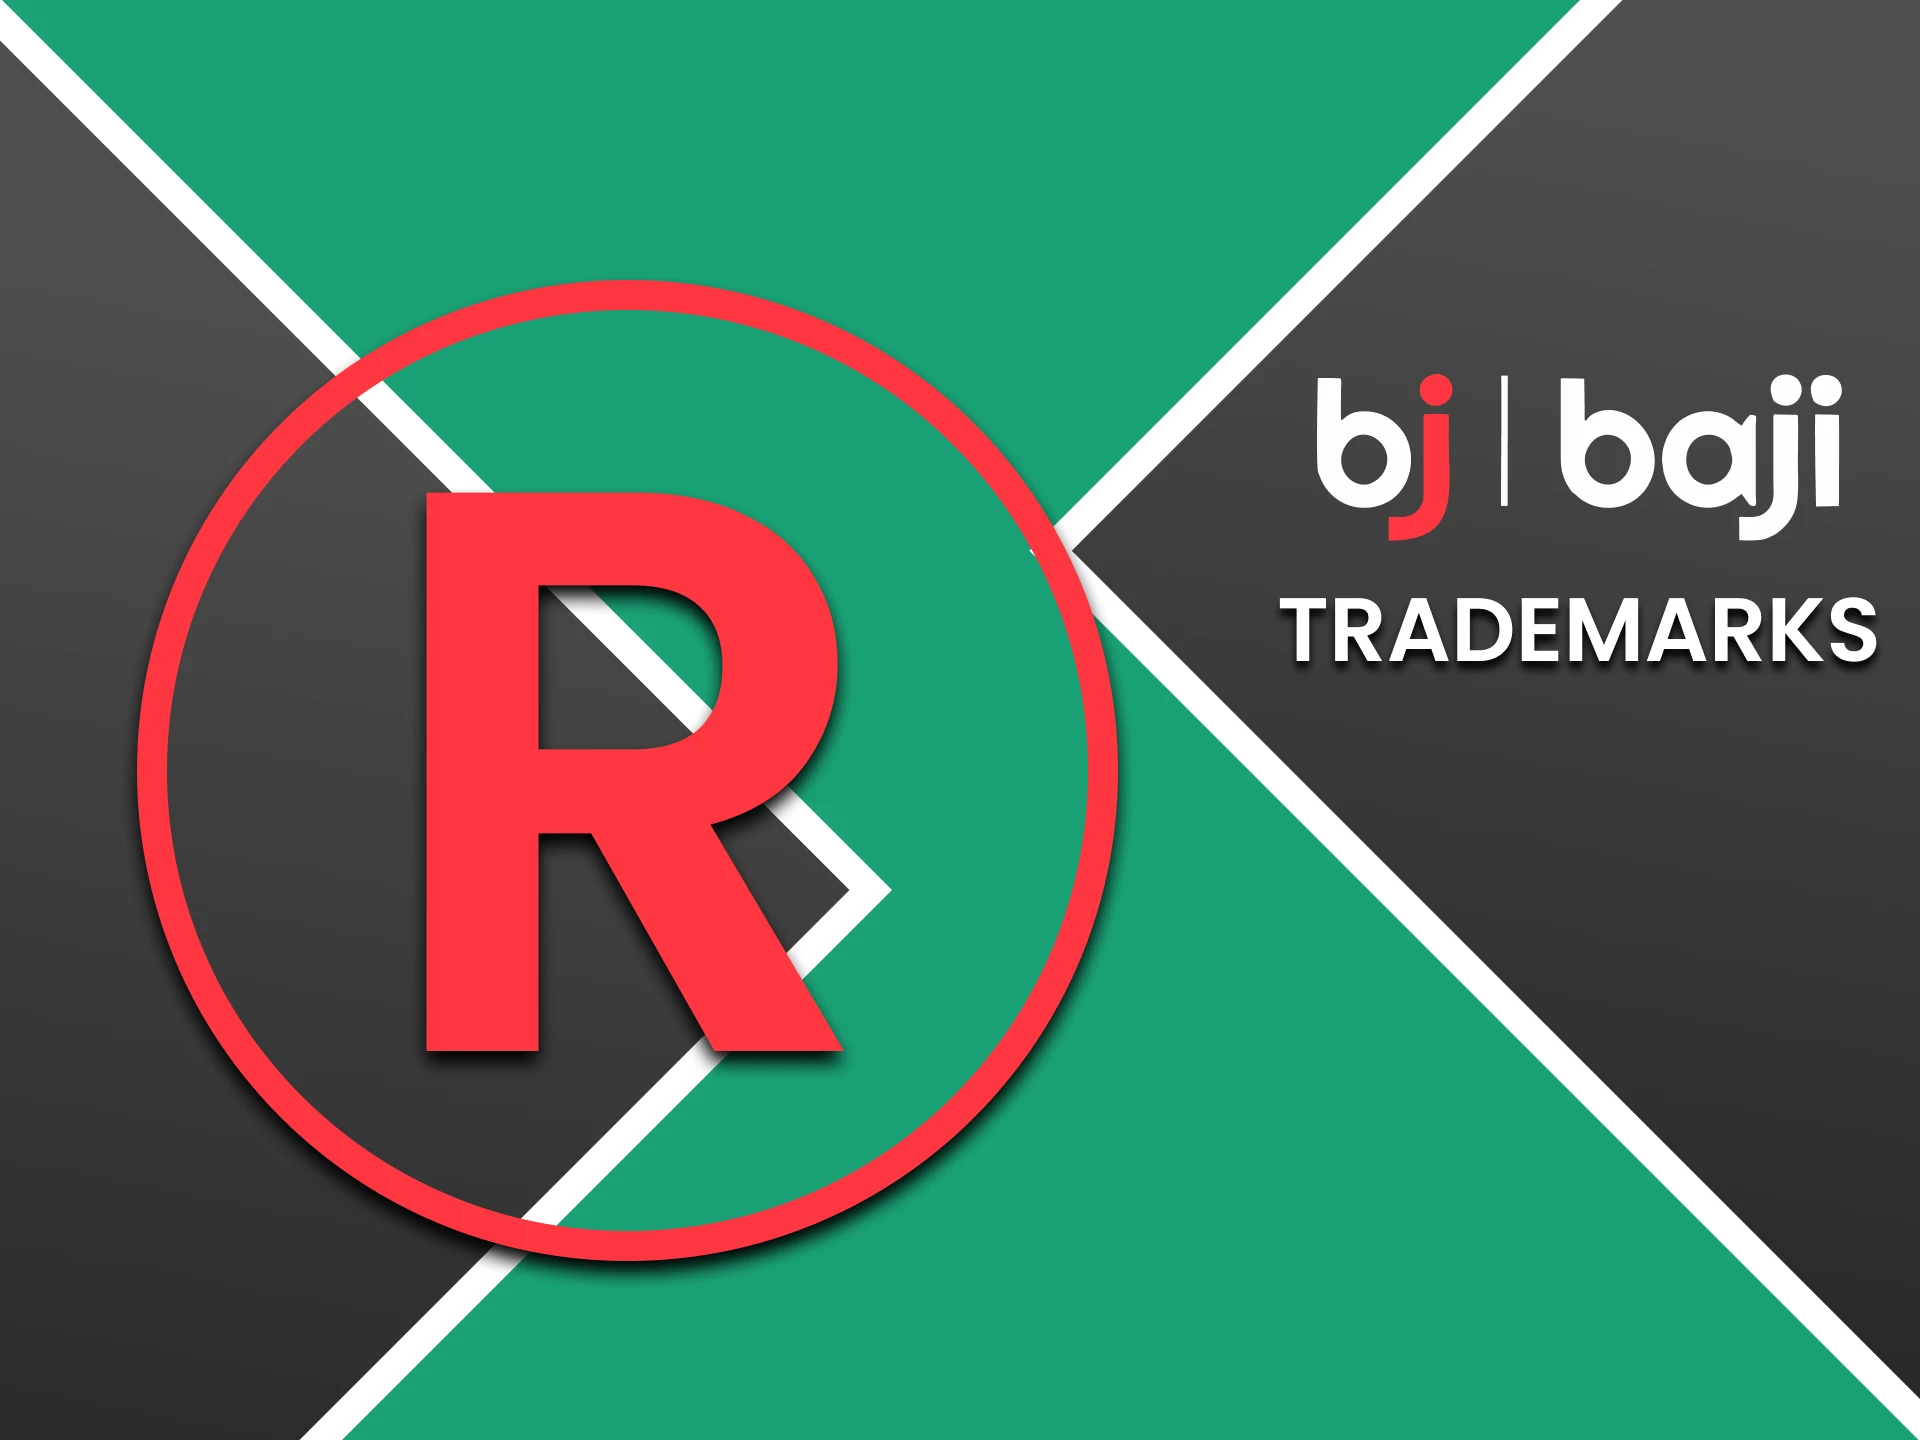 We will tell you who owns the trademarks on the Baji website.